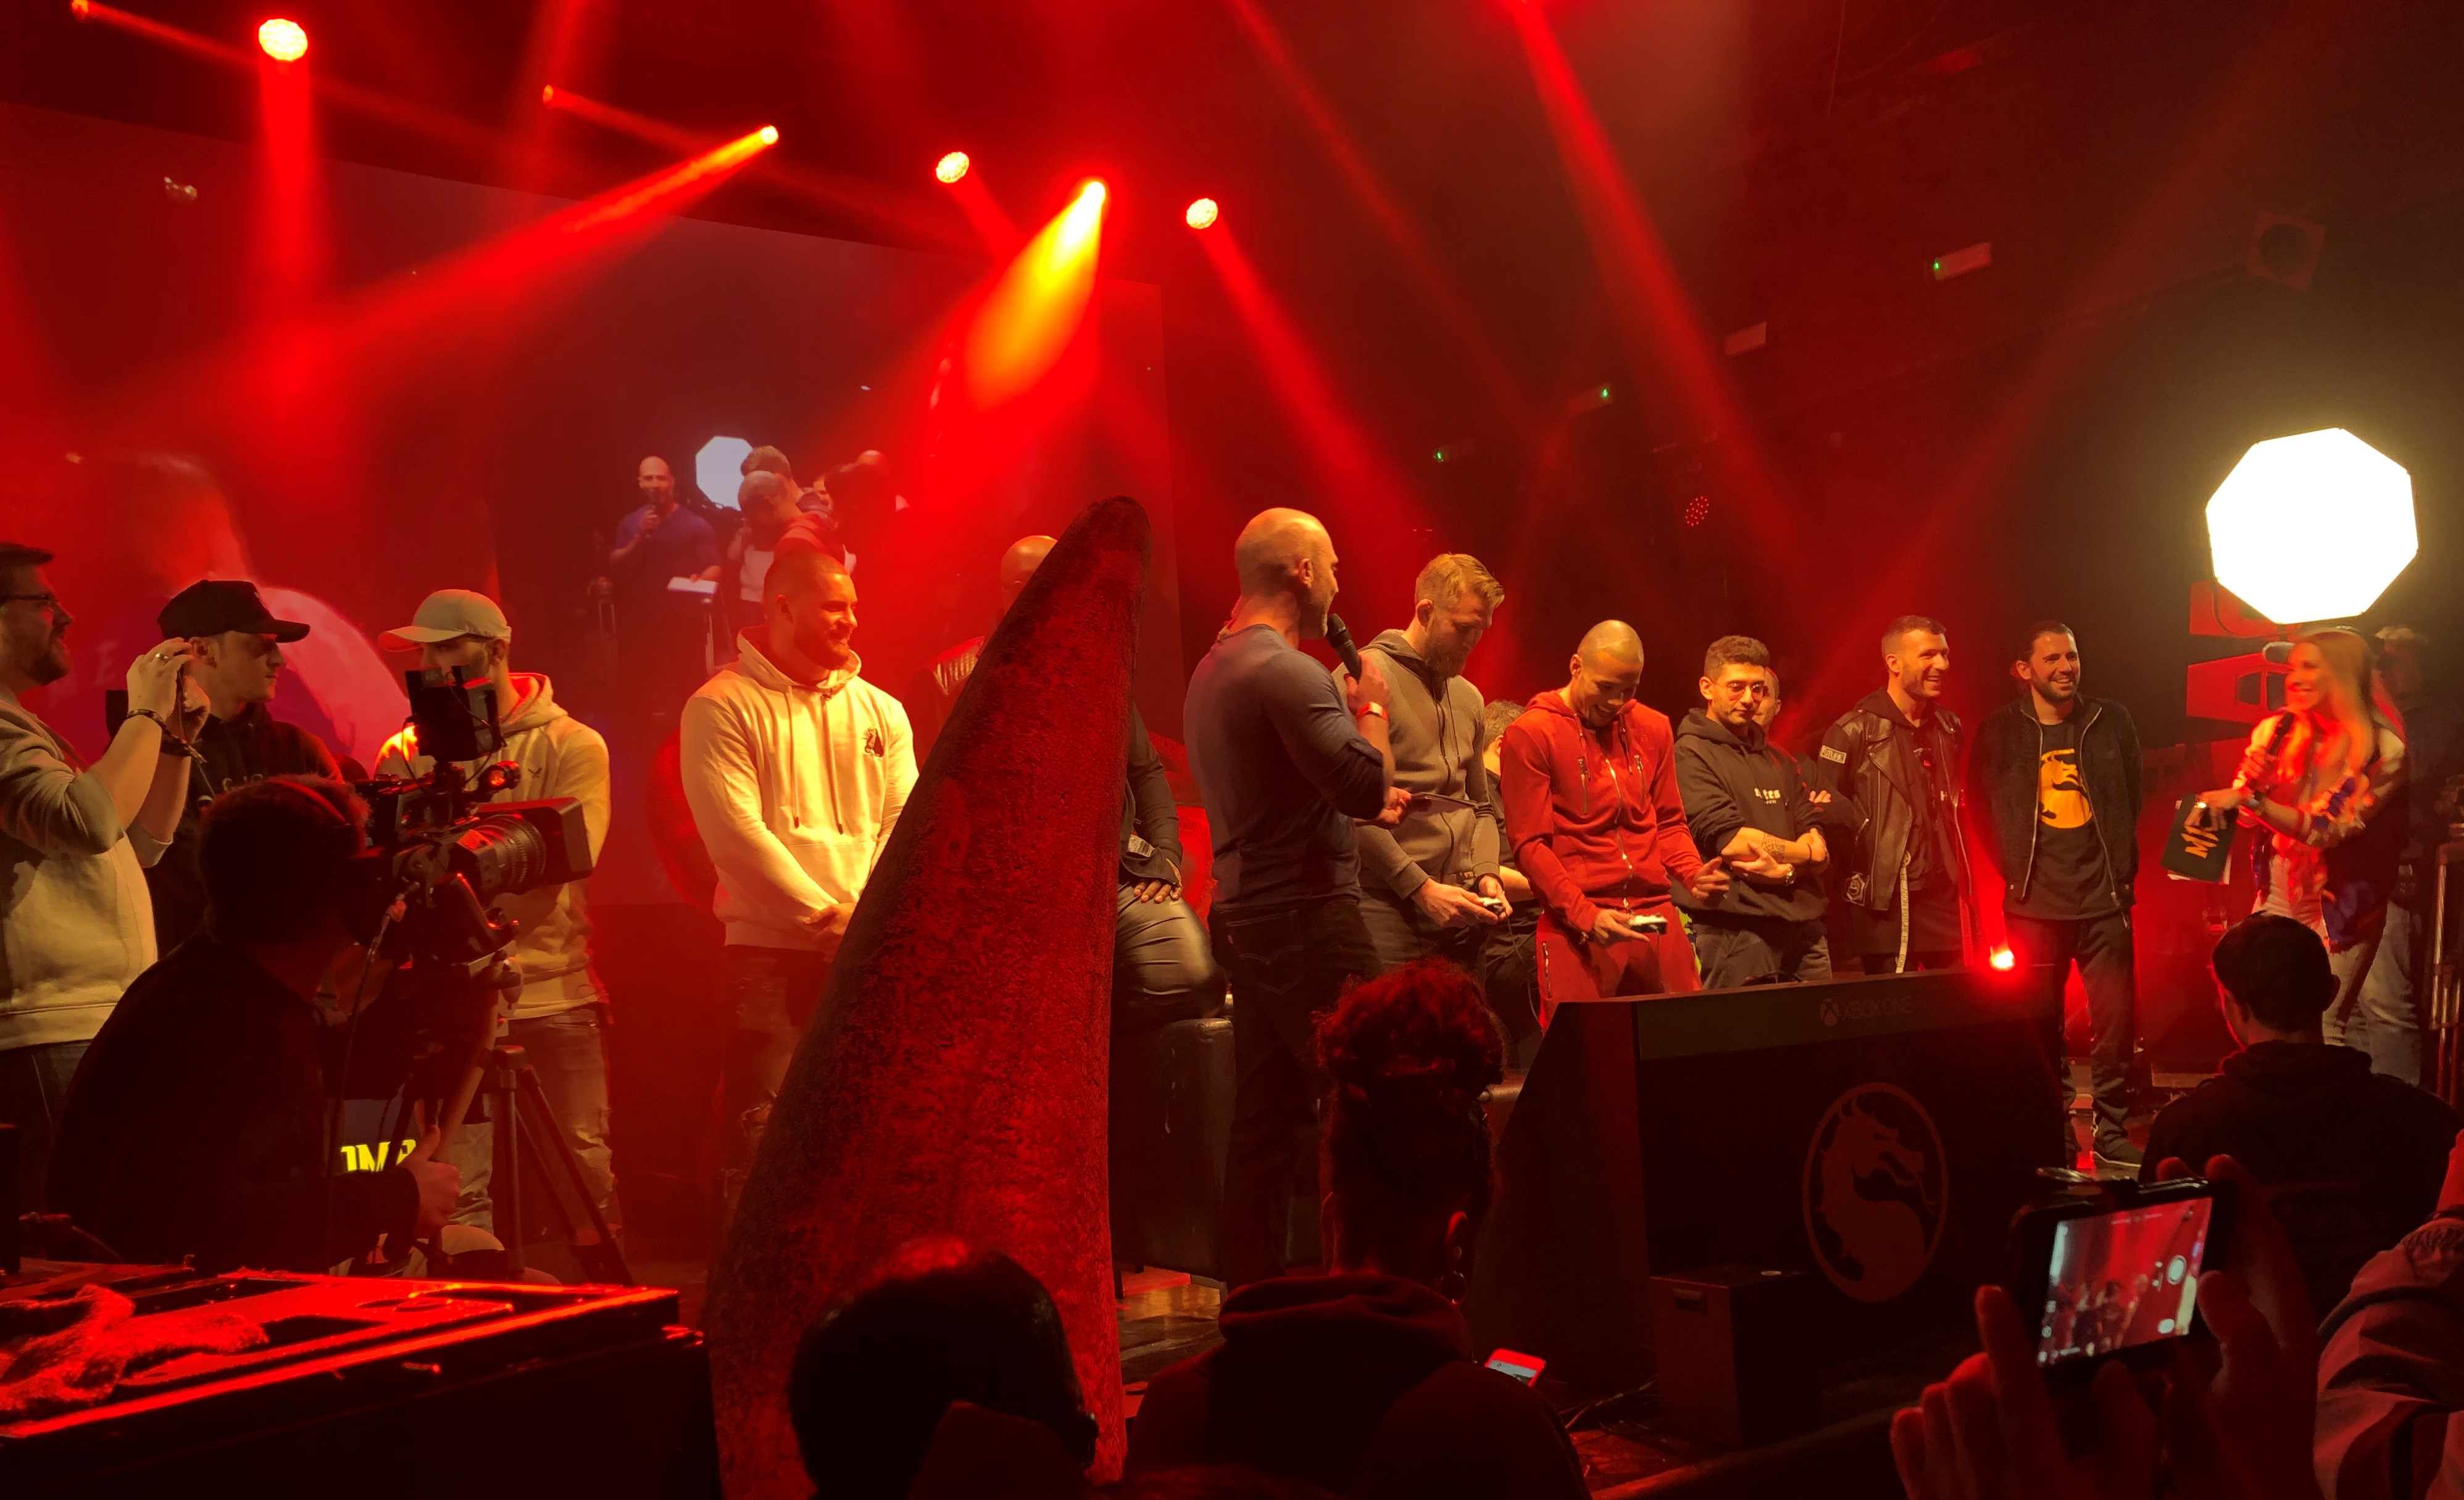 The celebrity contestants on stage before they play Mortal Kombat 11